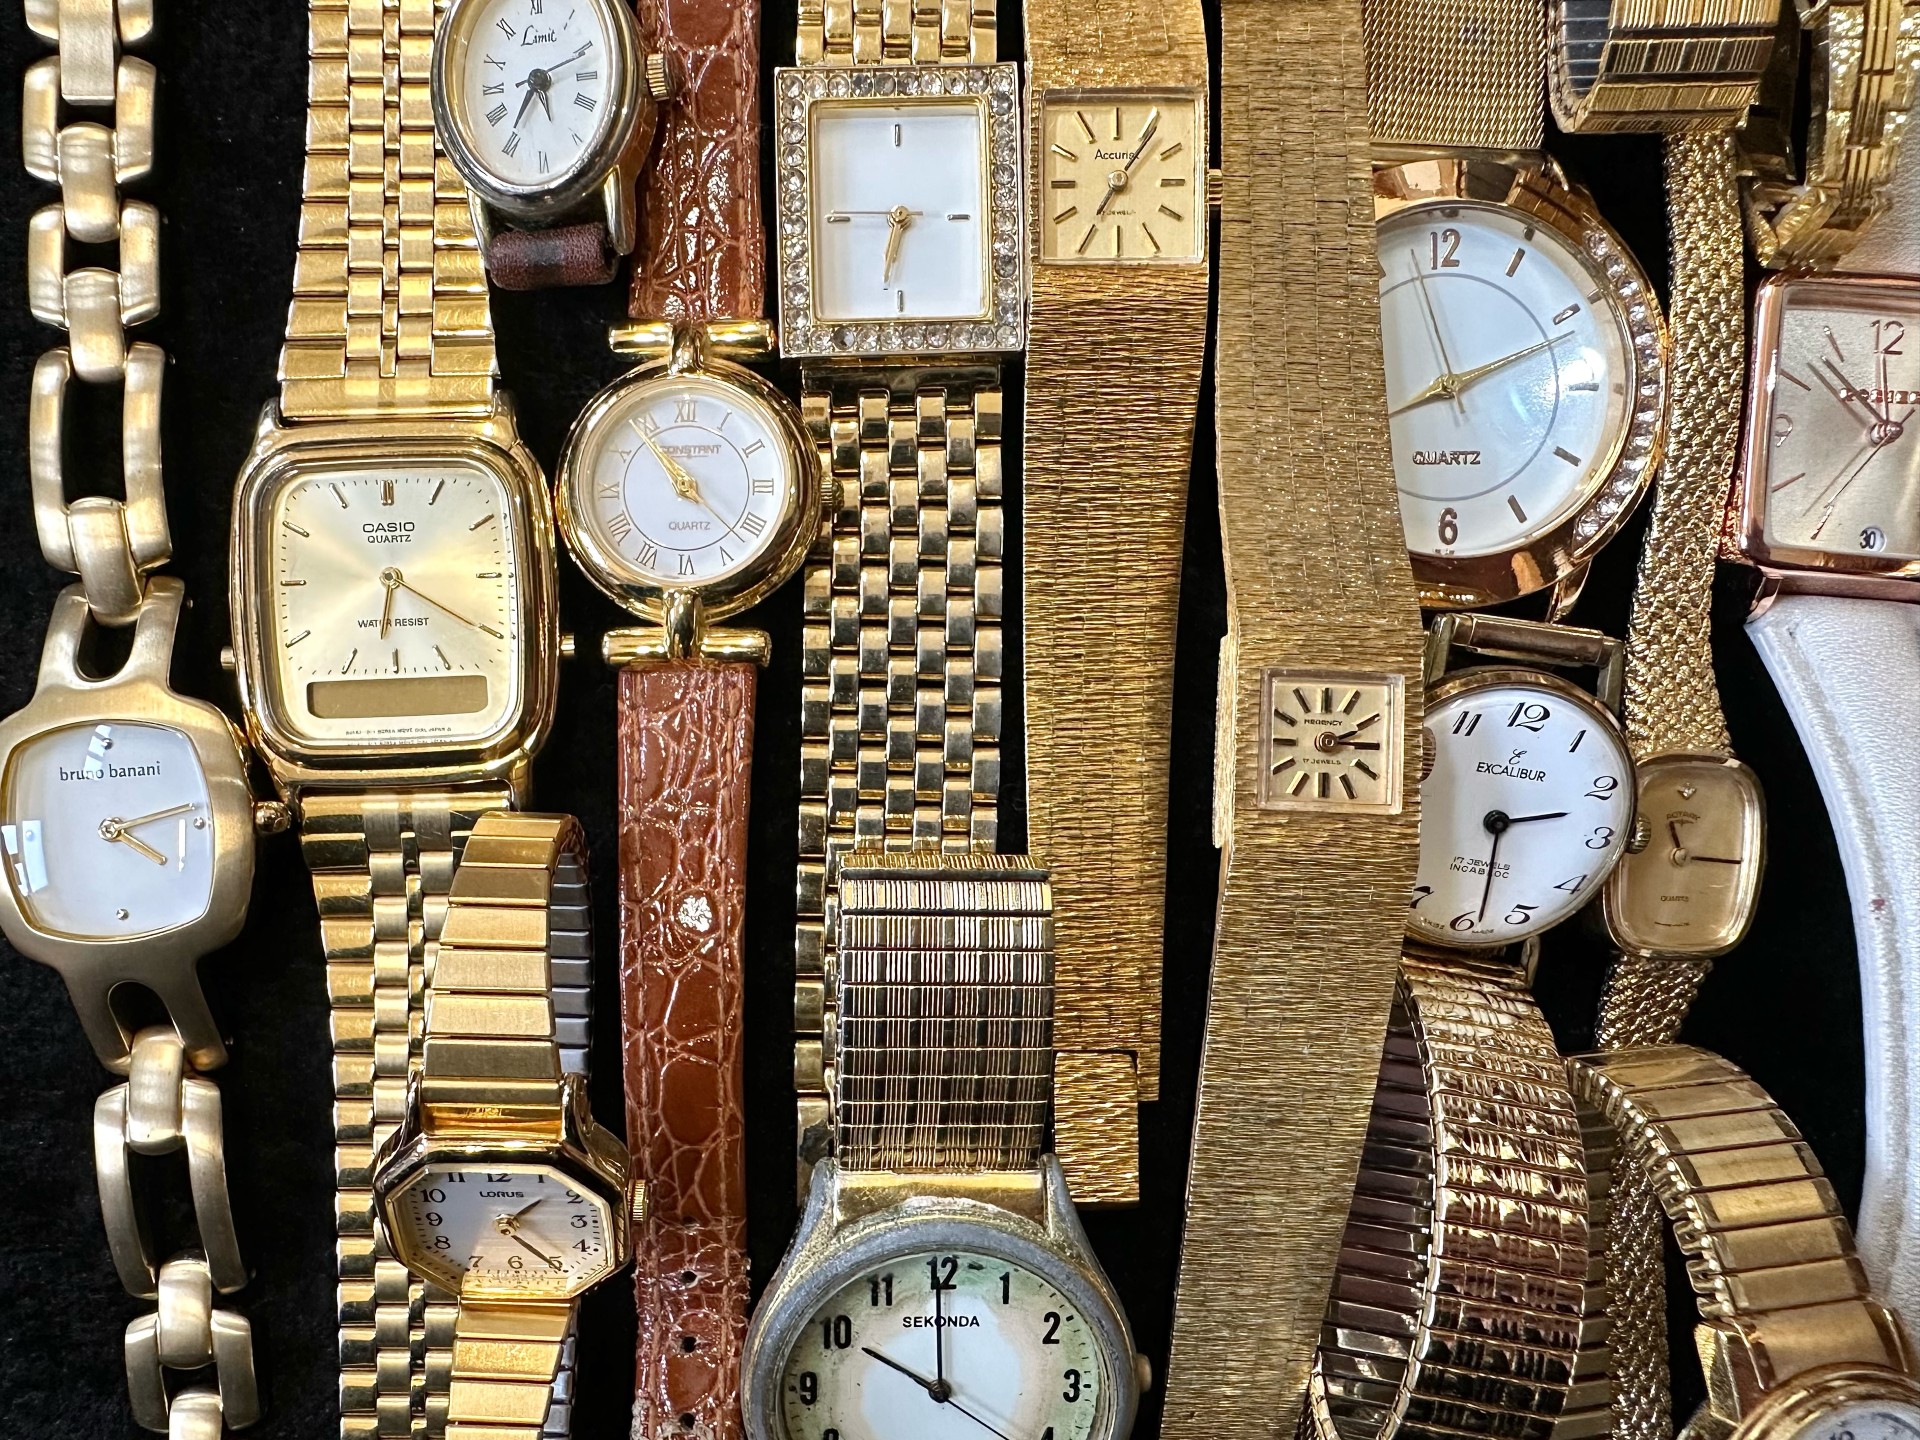 Collection of Ladies & Gent's Wristwatches, leather and bracelet straps, comprising Accurist, Royal, - Image 4 of 4